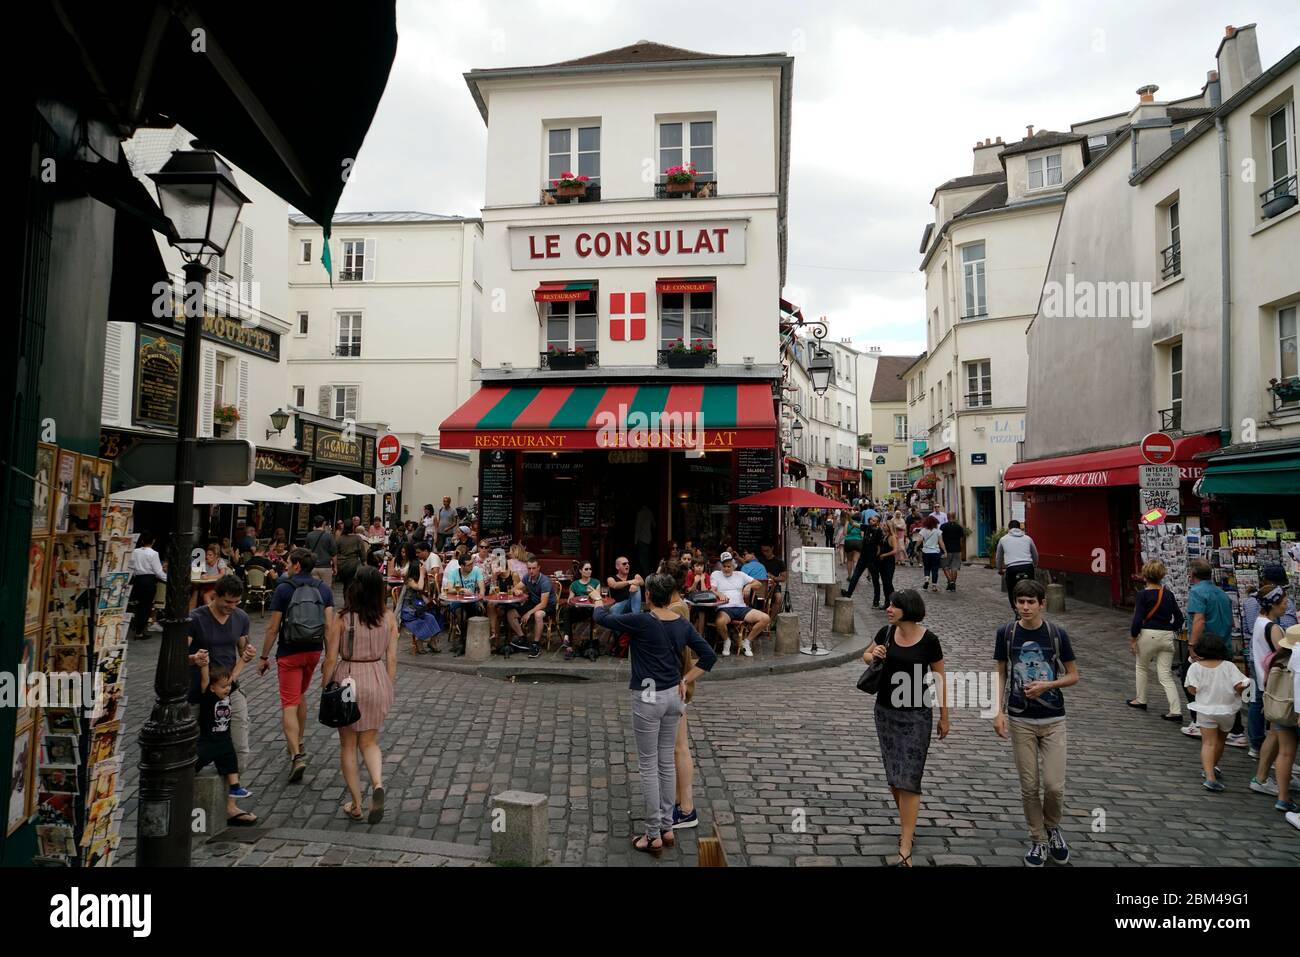 Le Consulat restaurant cafe with customers in the outdoor seating in Montmartre.Paris.France Stock Photo